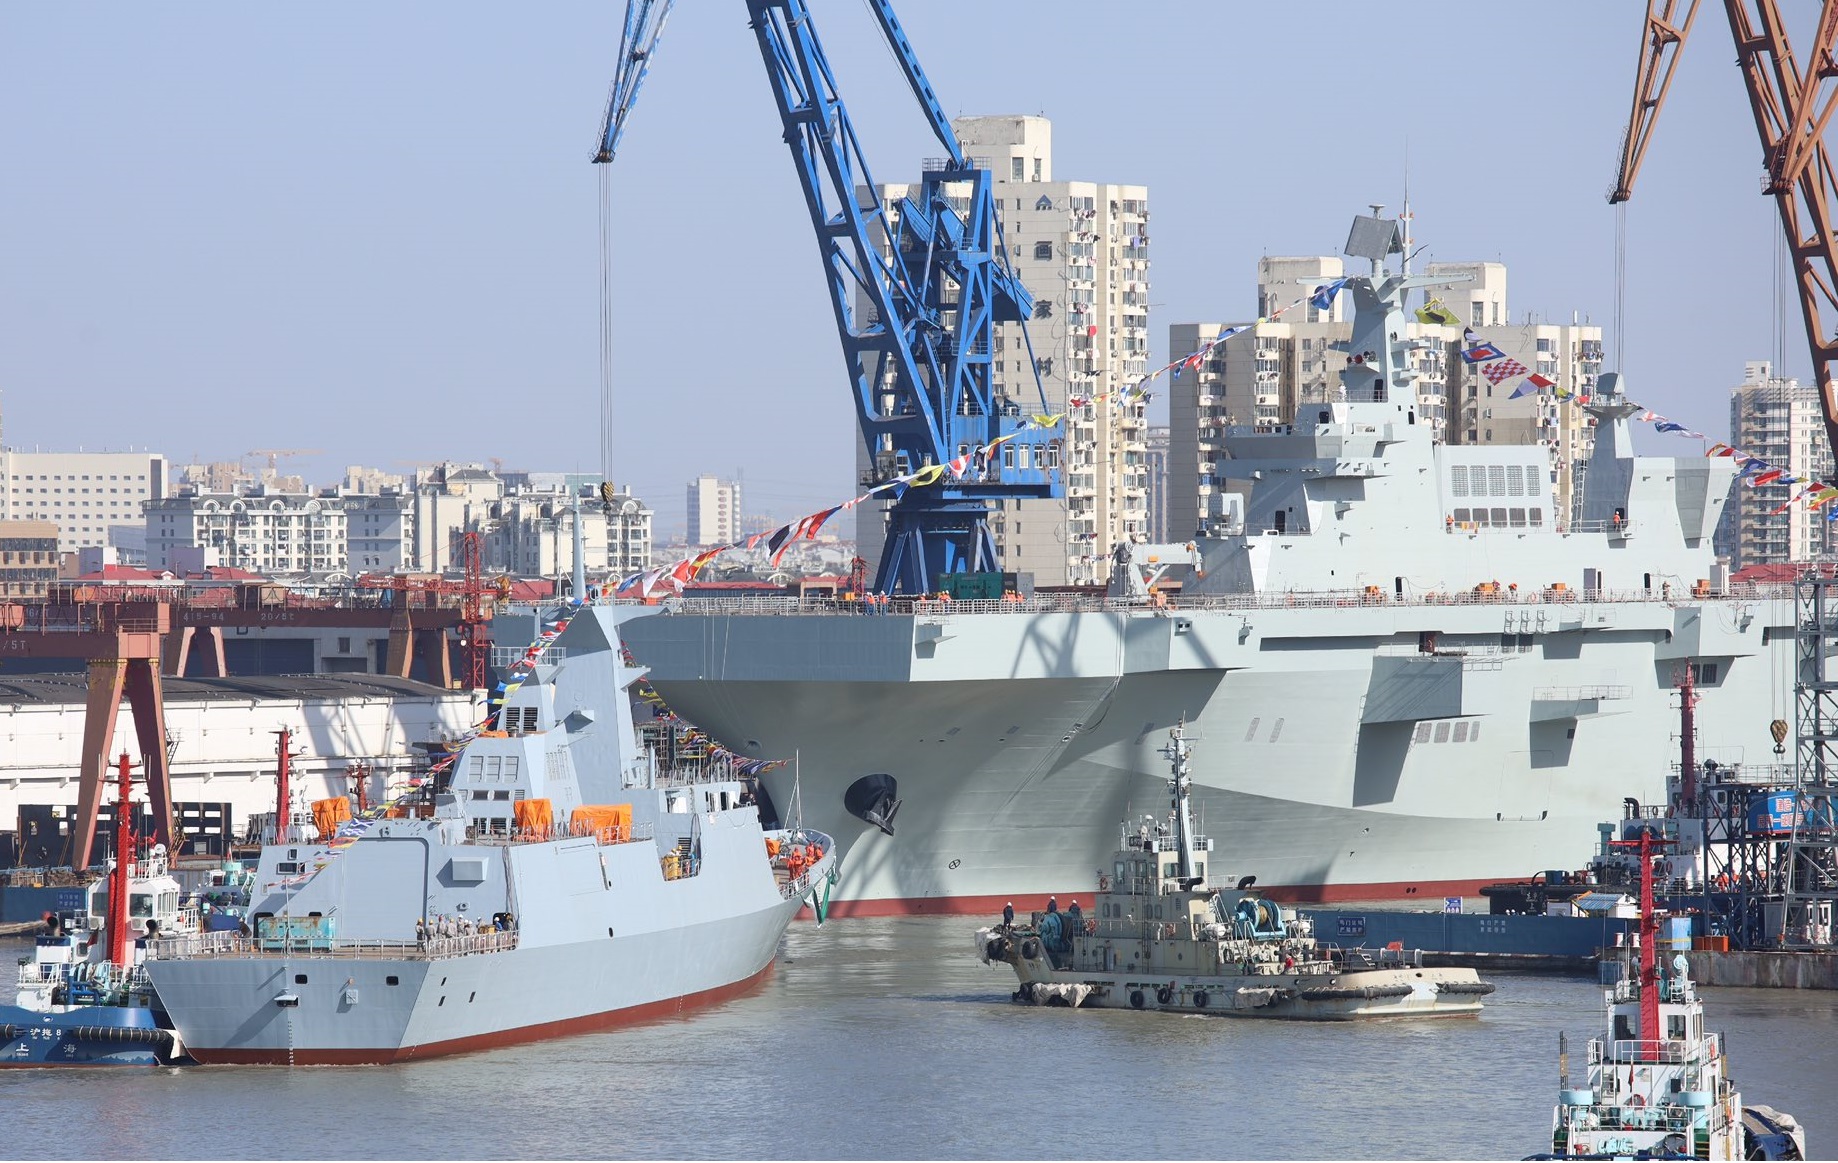 Chinese People's Liberation Army Navy Launches 3rd Type 075 Landing Helicopter Dock